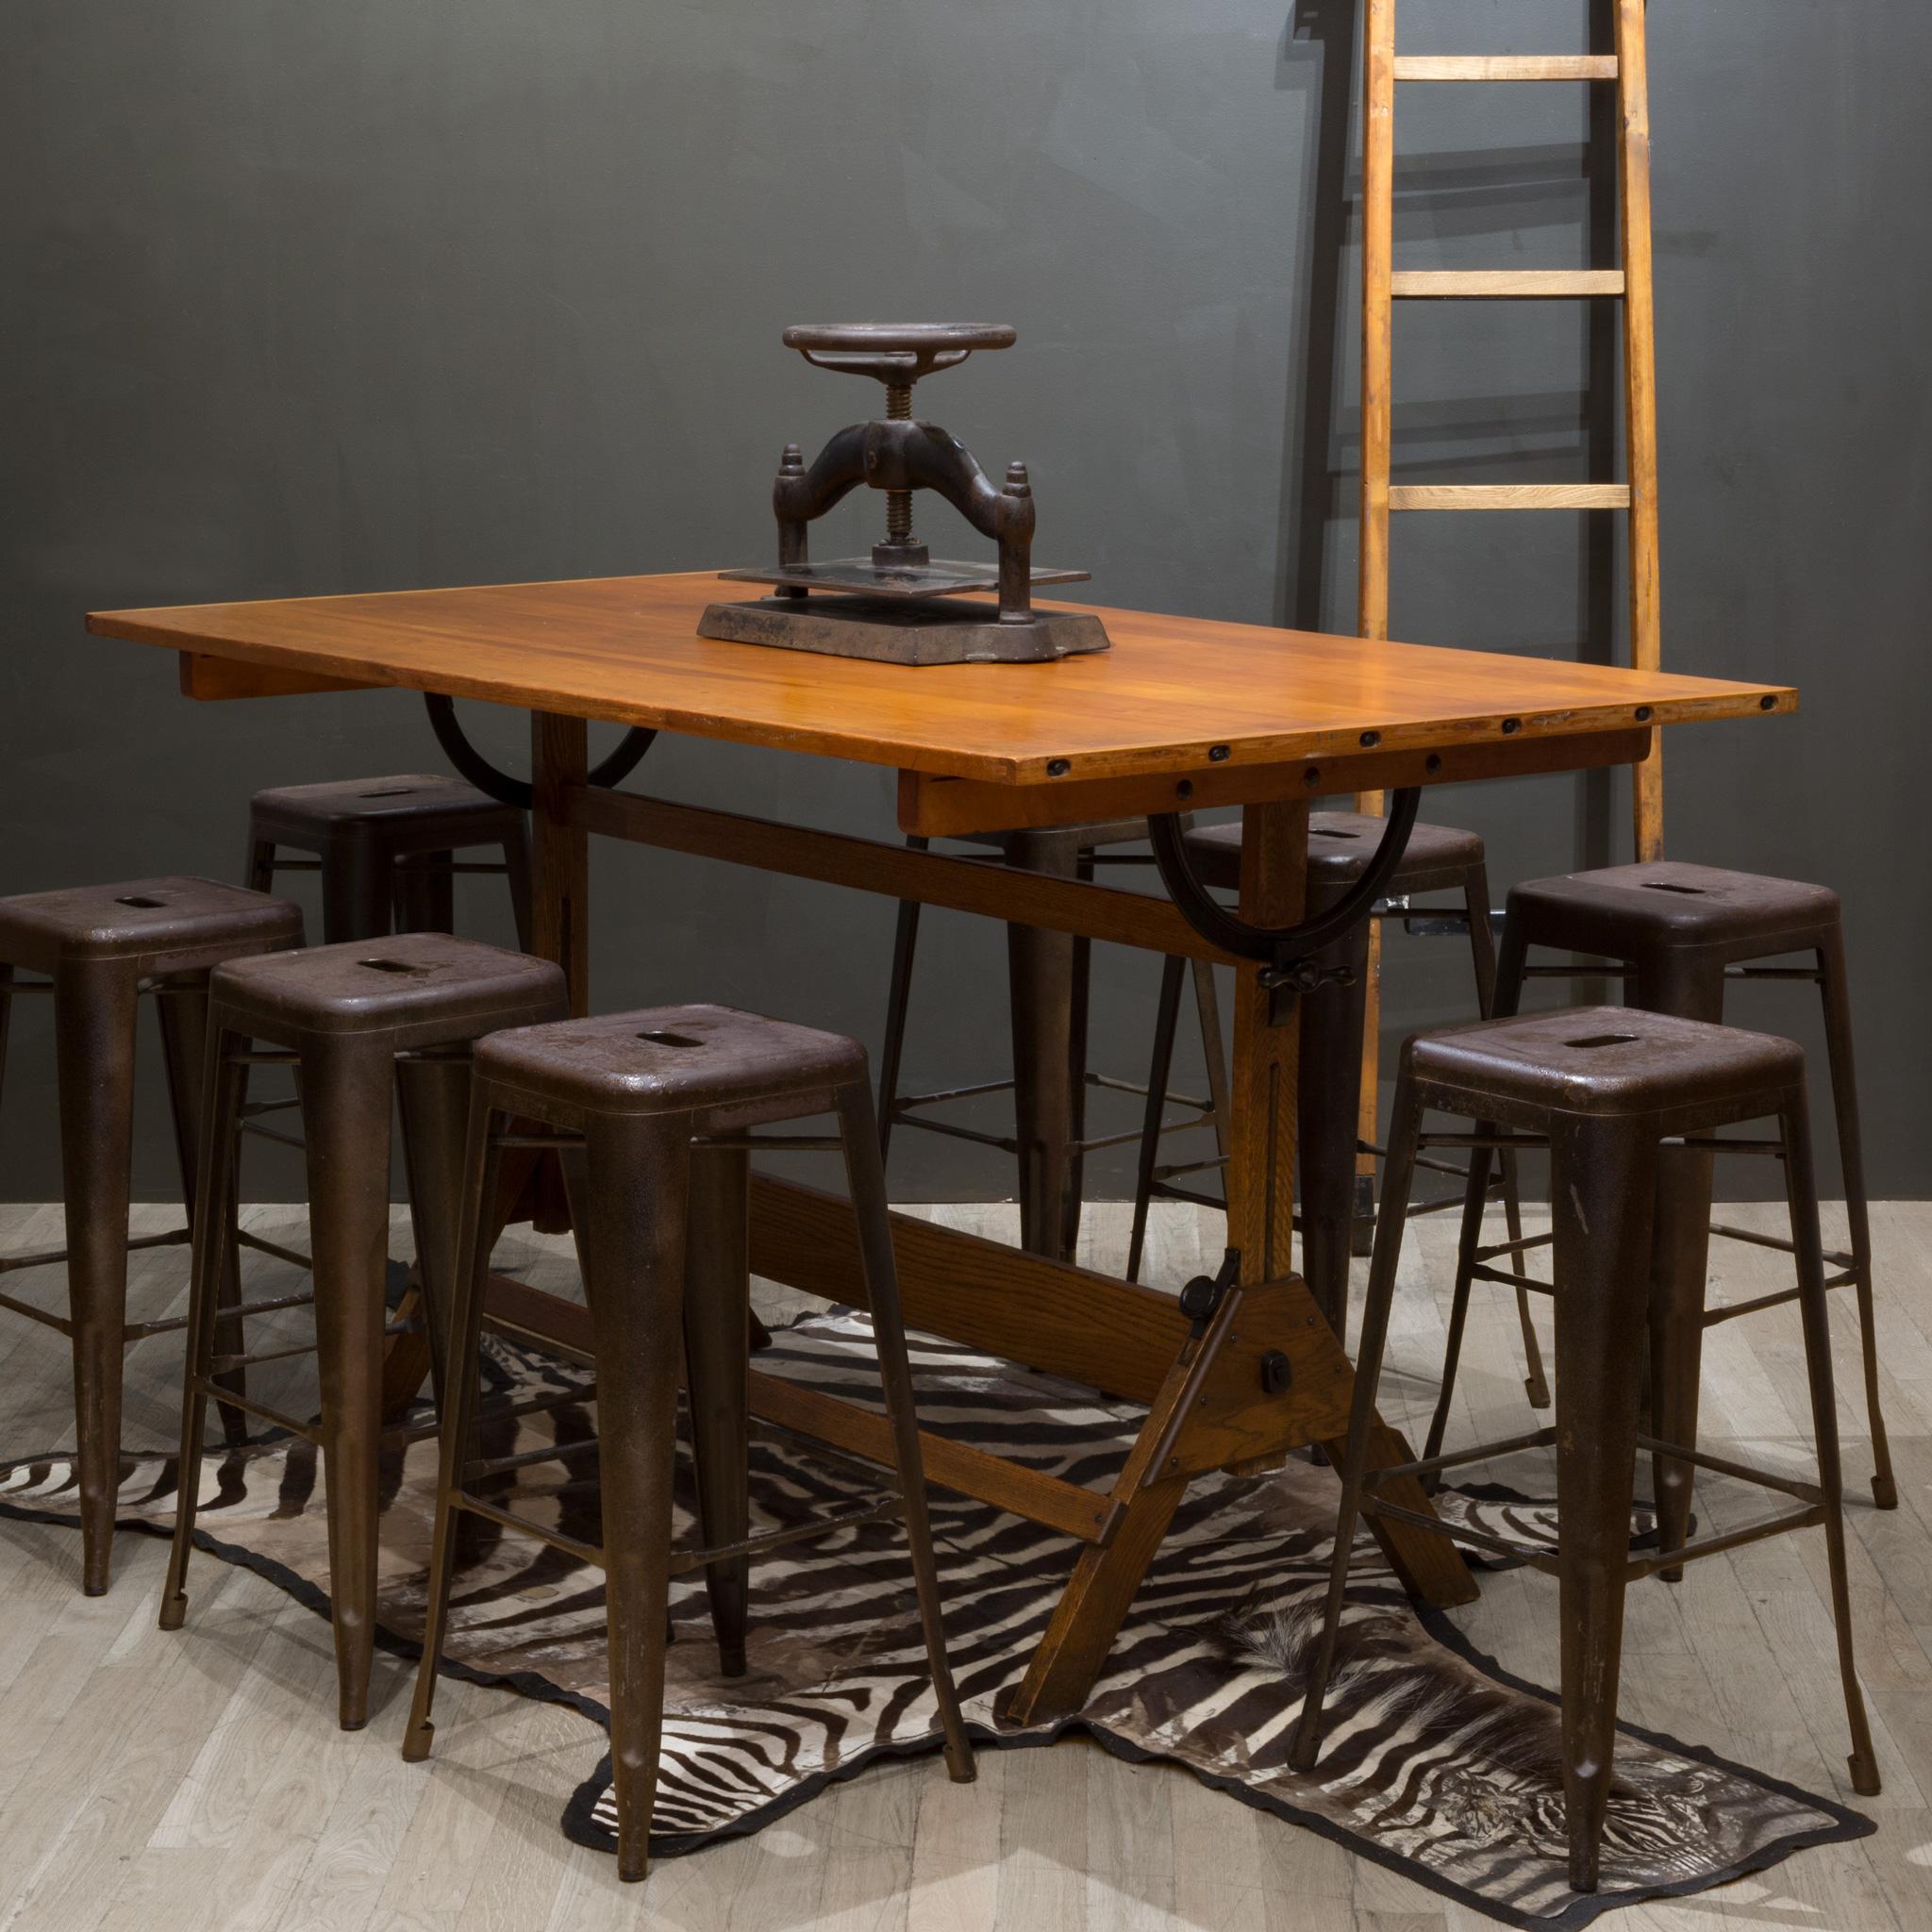 ABOUT

Contact us for more shipping options: S16 Home San Francisco. 

A large fully adjustable industrial drafting table with solid wood top and cast iron knobs. The table can be used as a tall dining table, desk or drafting table. The top swivels